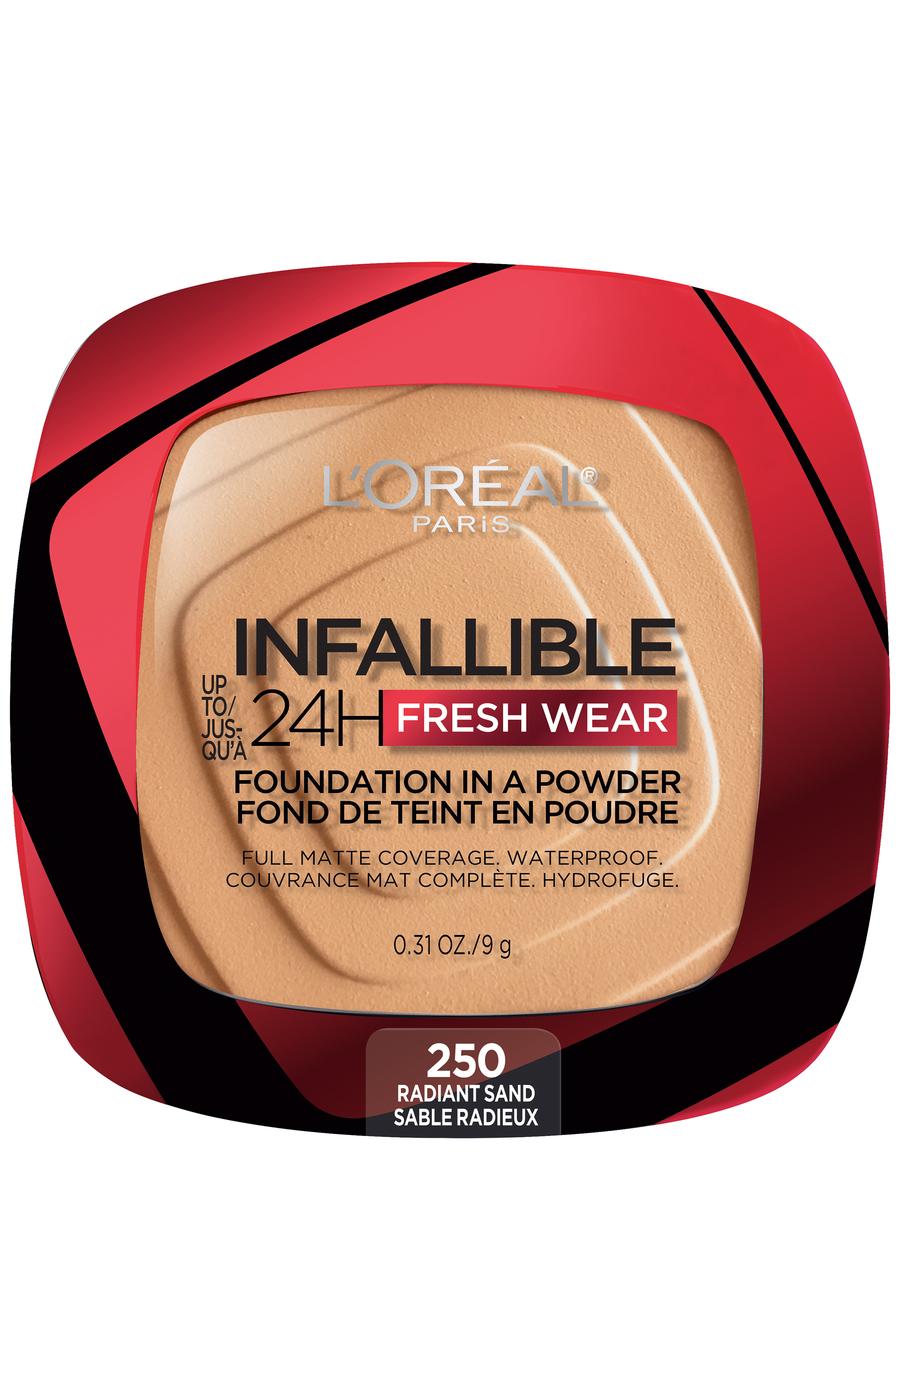 L'Oréal Paris Infallible Up to 24H Fresh Wear Foundation in a Powder Radiant Sand; image 1 of 4